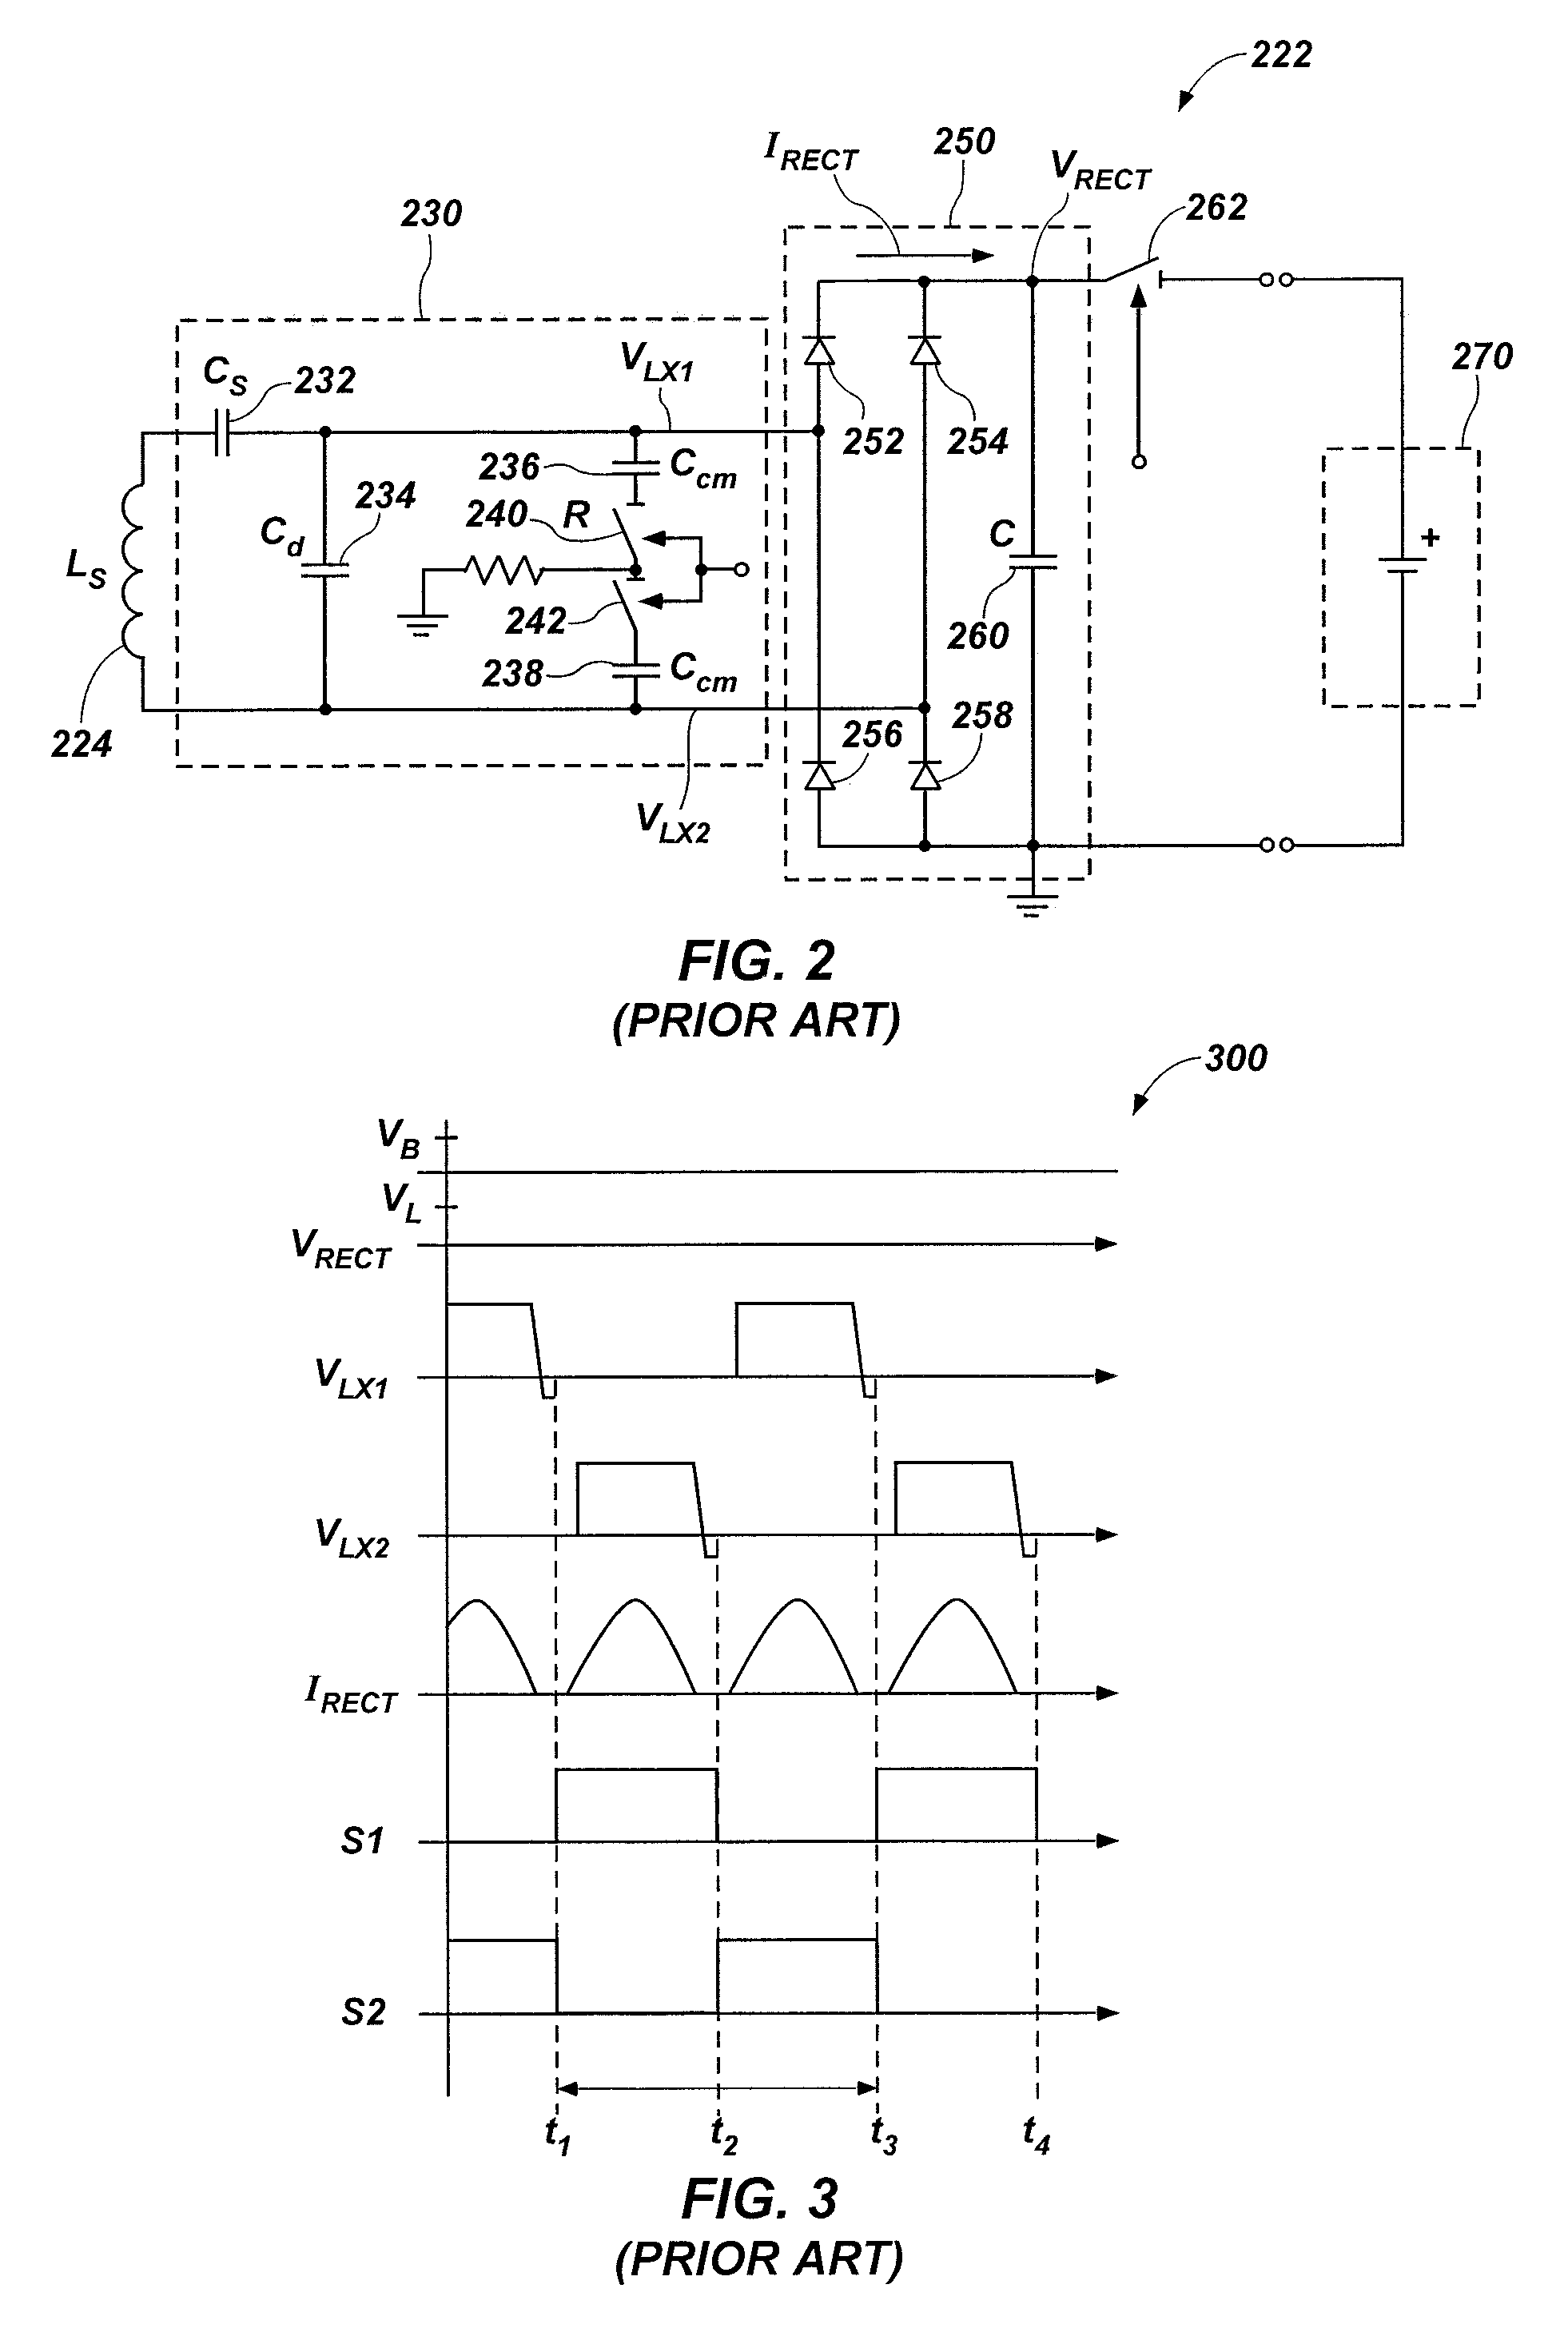 Apparatuses and related methods for modulating power of a wireless power receiver